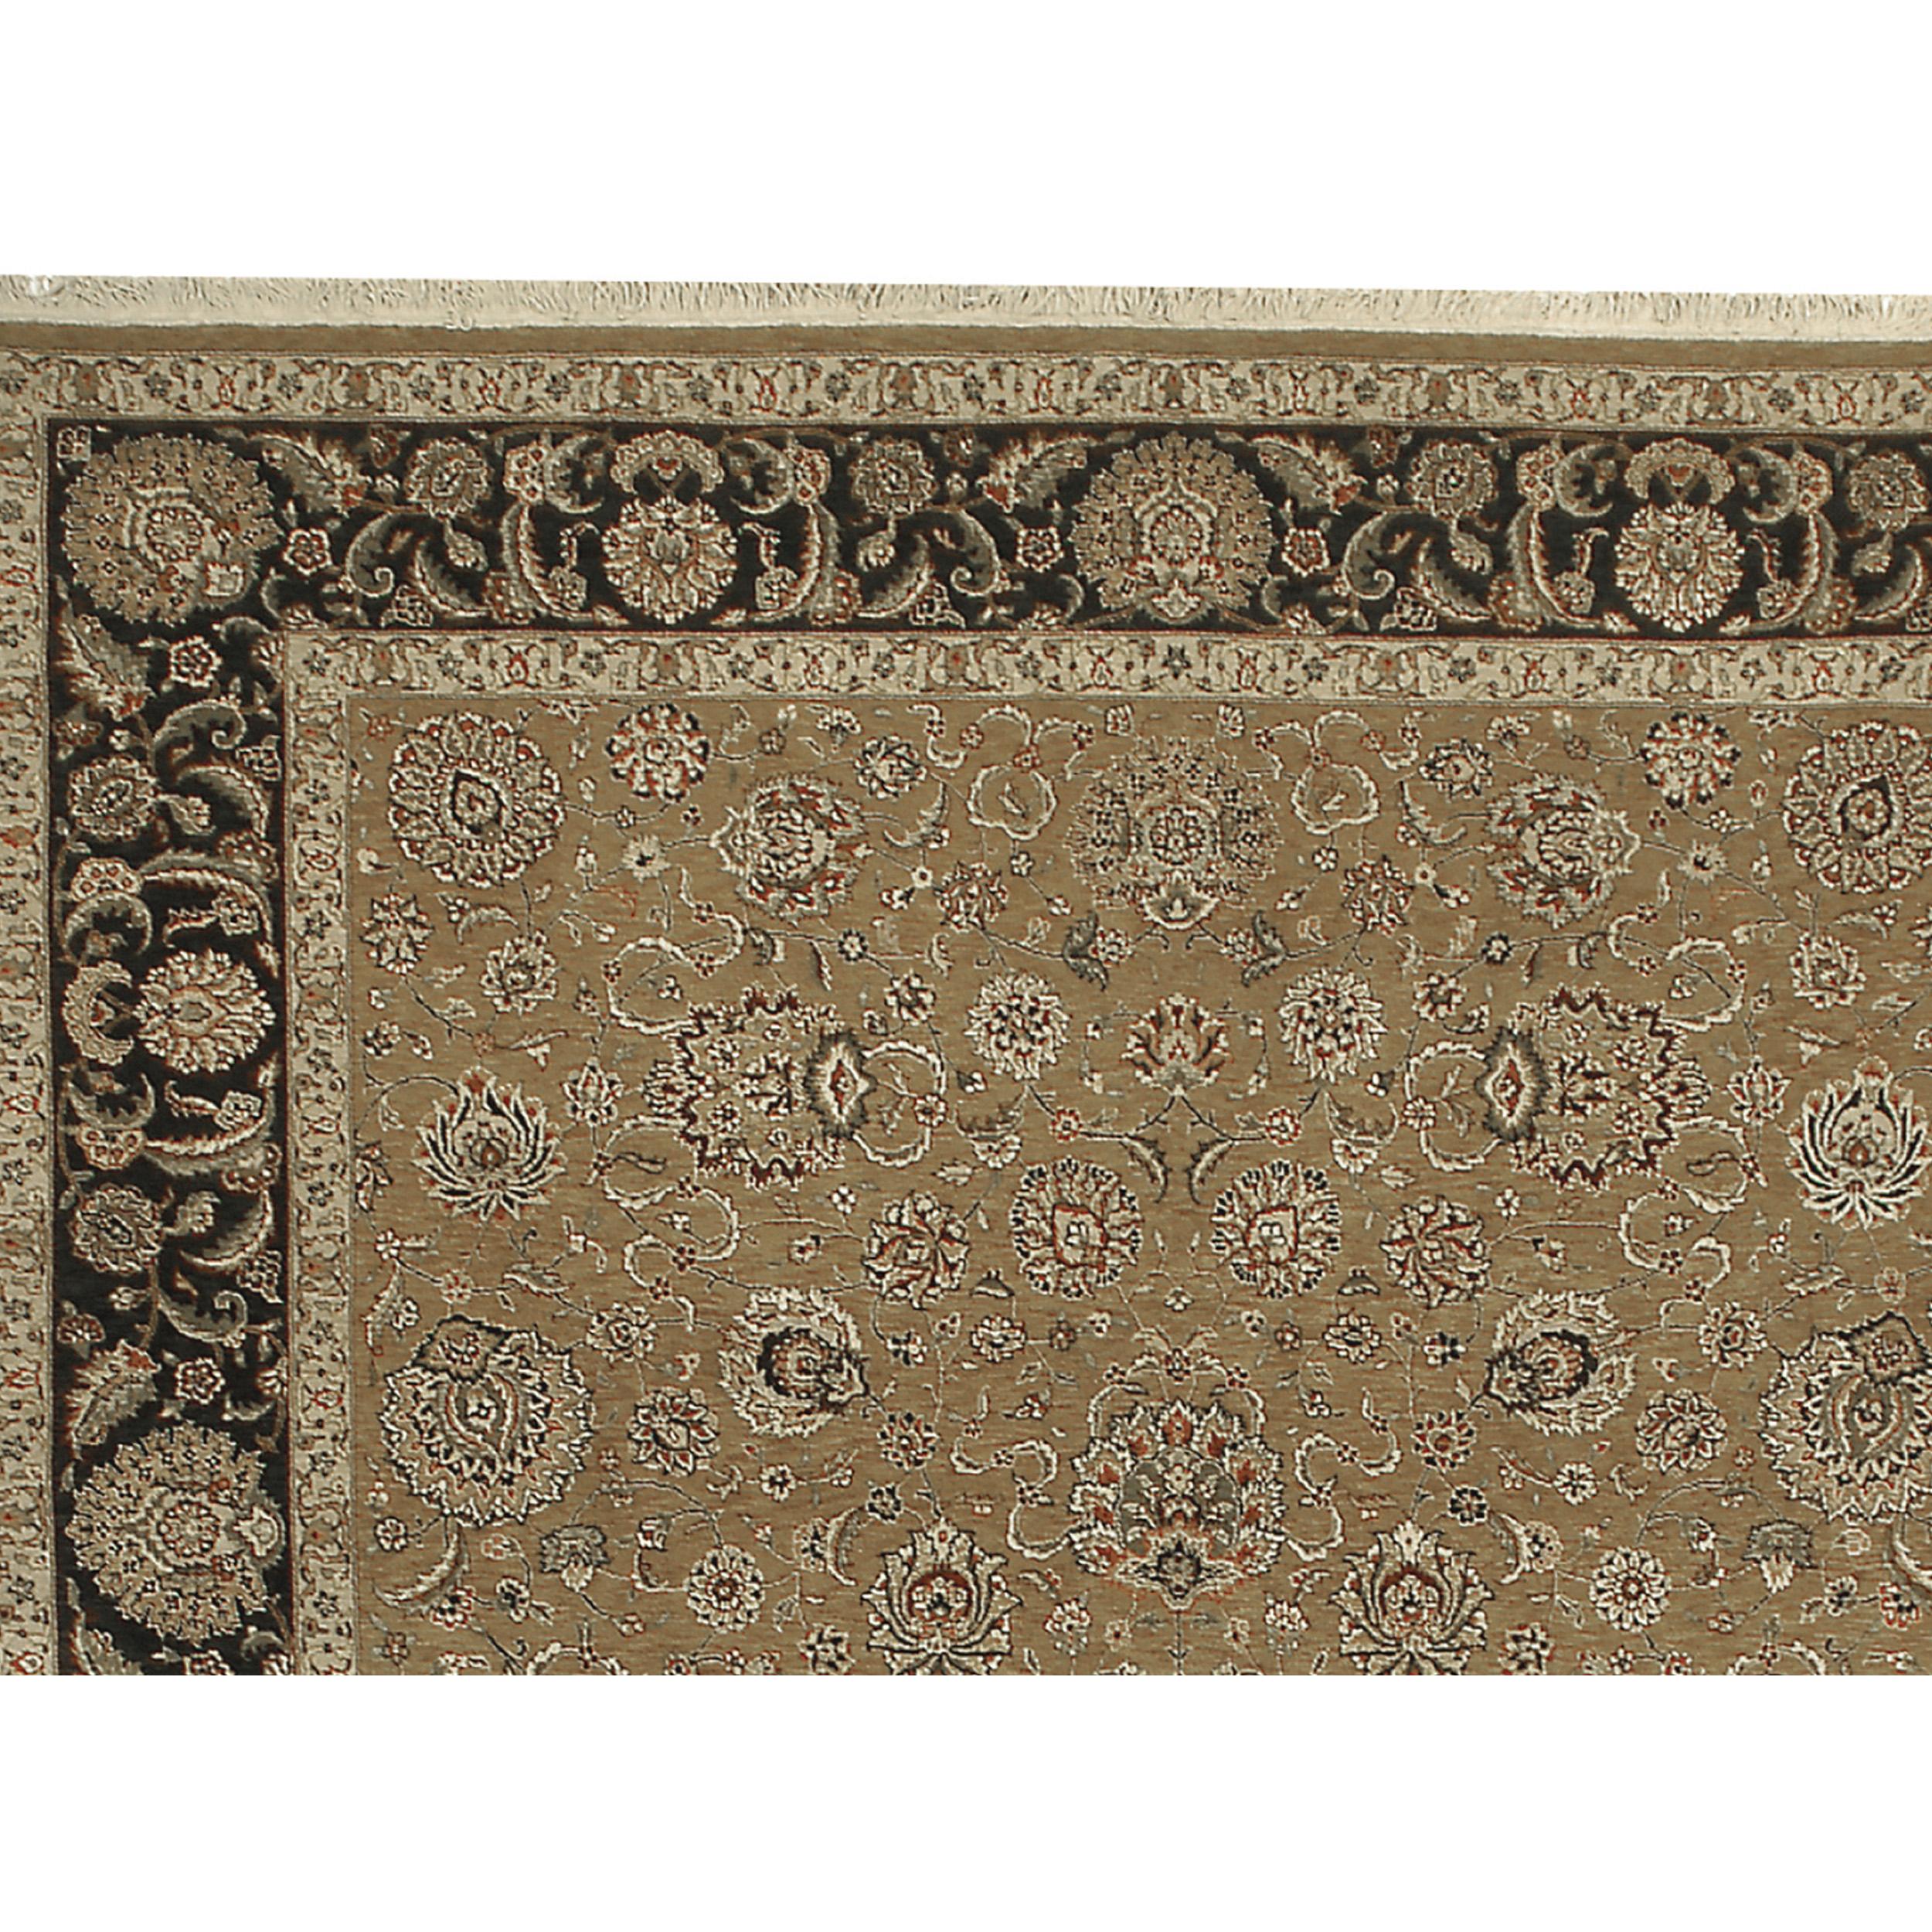 This rug deisgn is based on antique Persian rug designs, but using a contemporary color palette. The main characteristic of this rug is the noticeable abrash (color change), a new technique of weaving between two color hues, imparts an antique look.